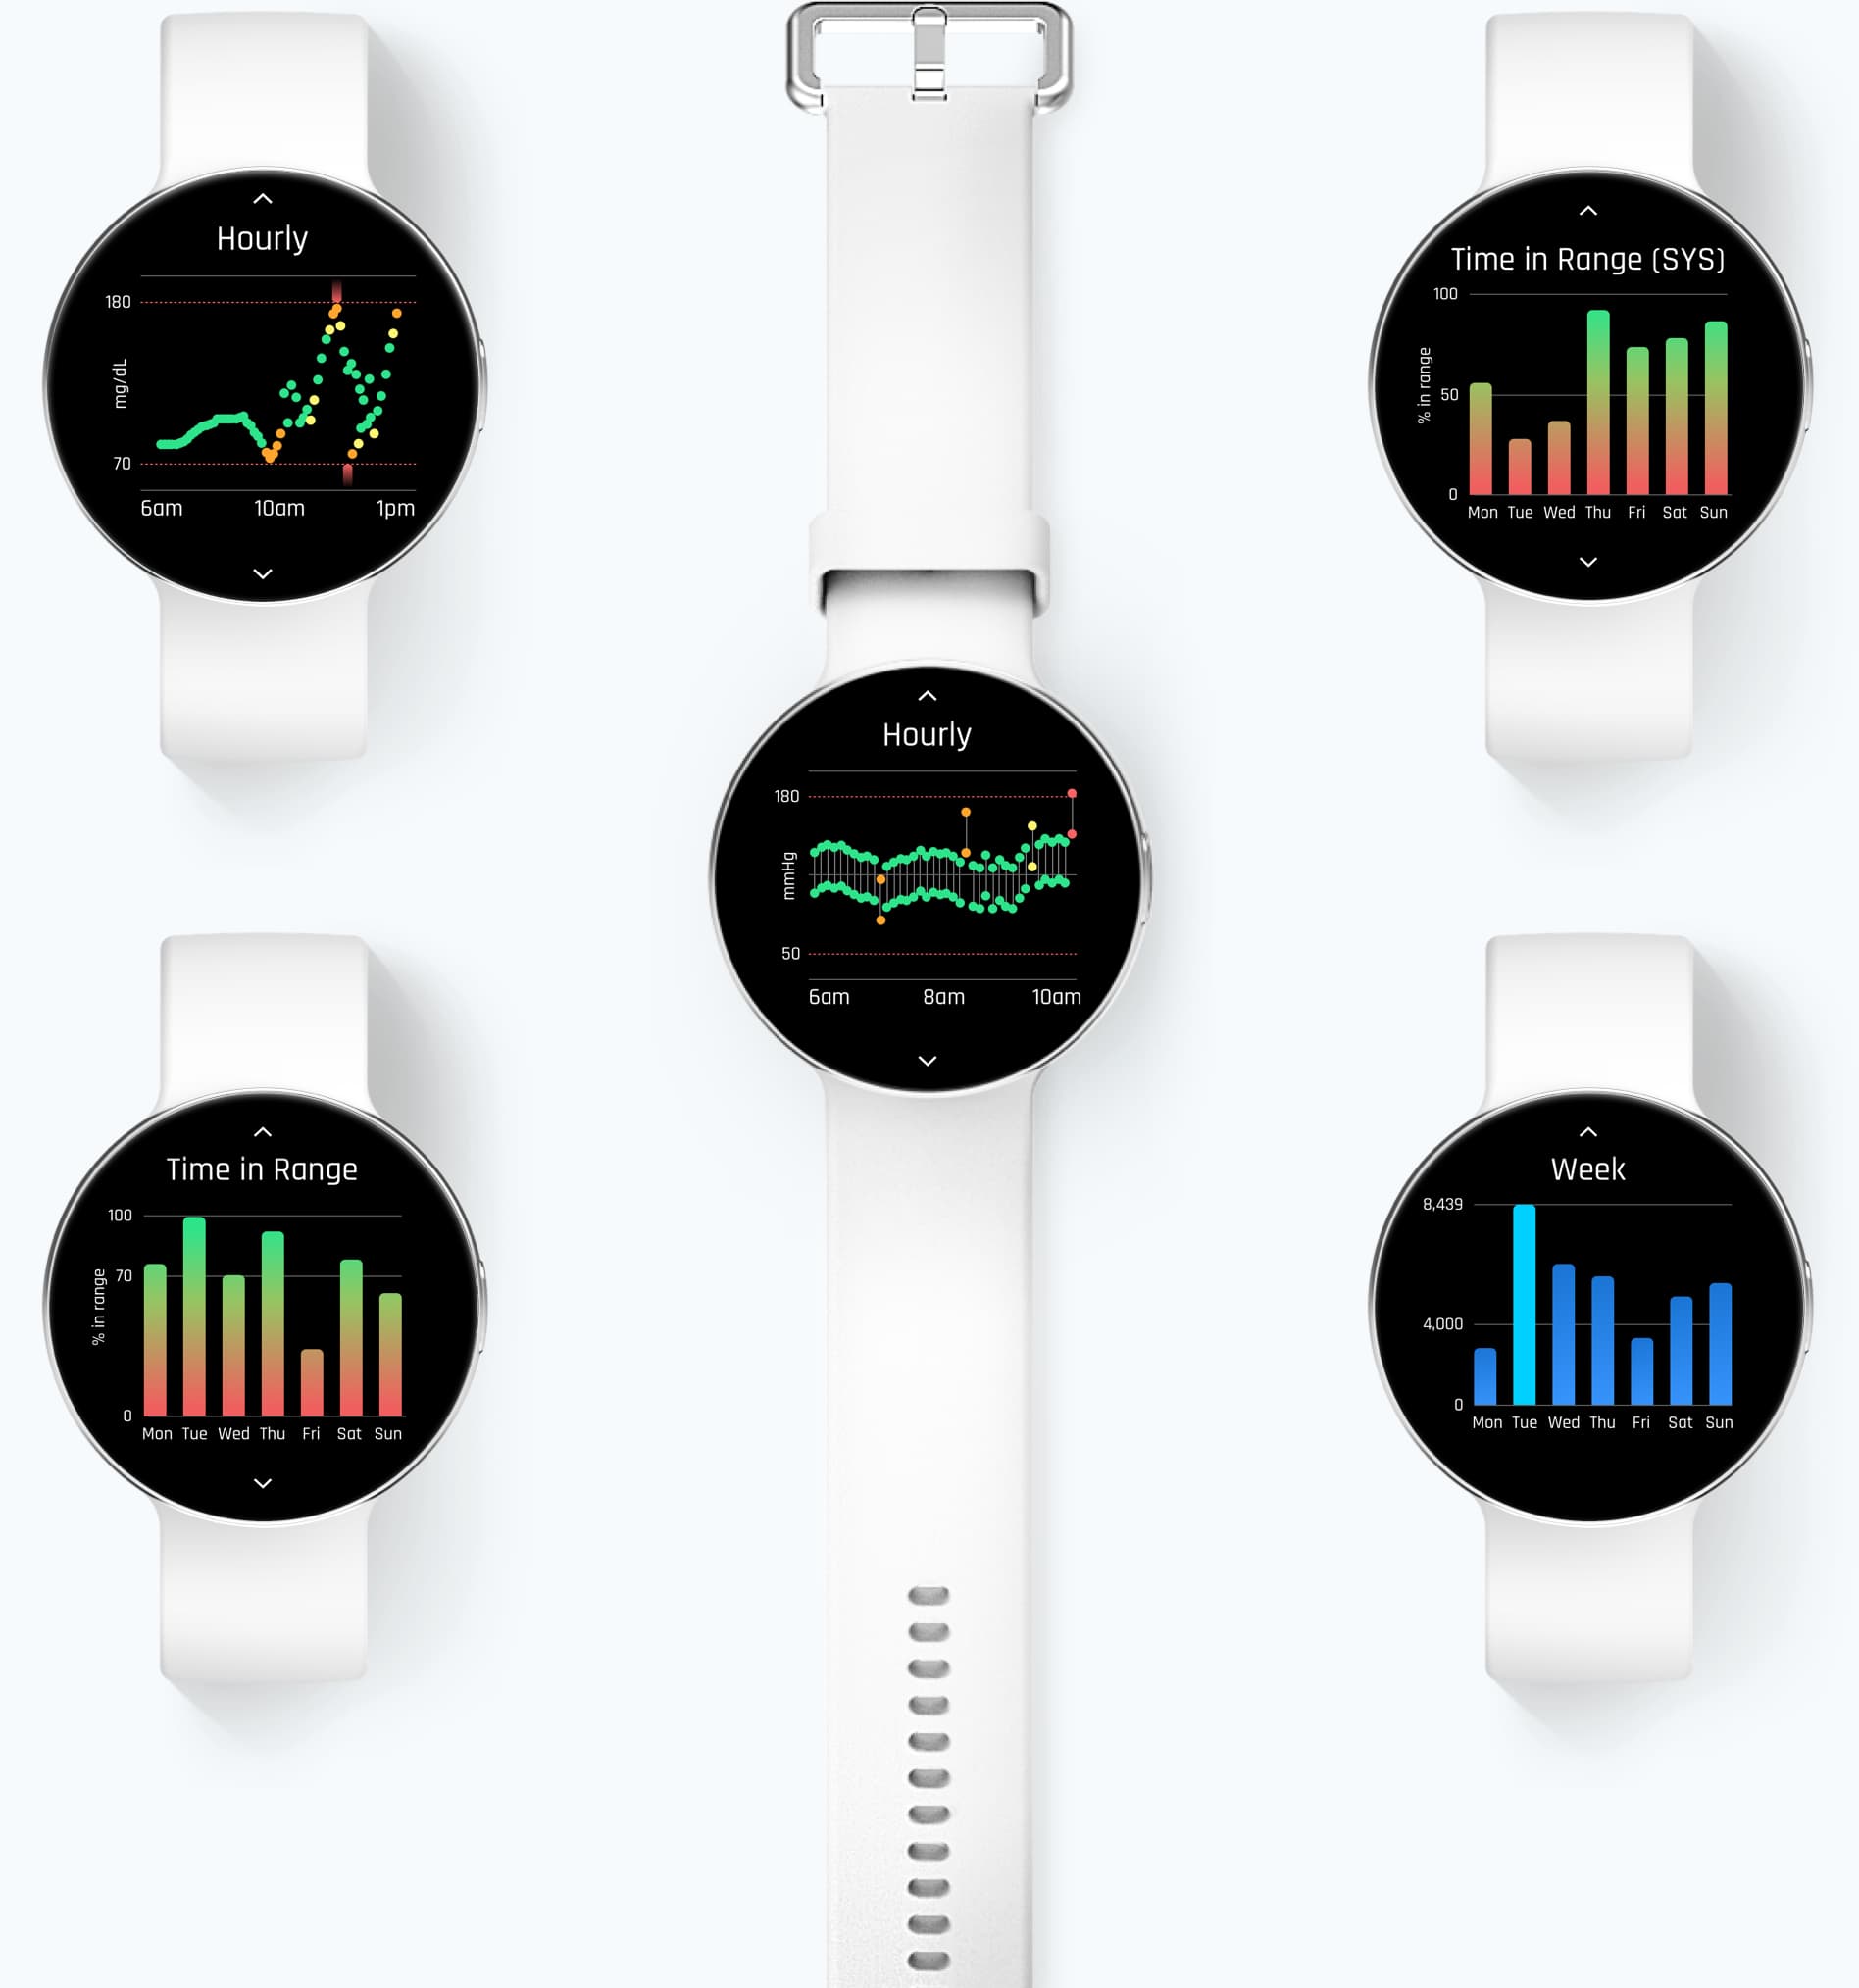 Rendering of smartwatch showing various screen designs for graphing vital signs over time.